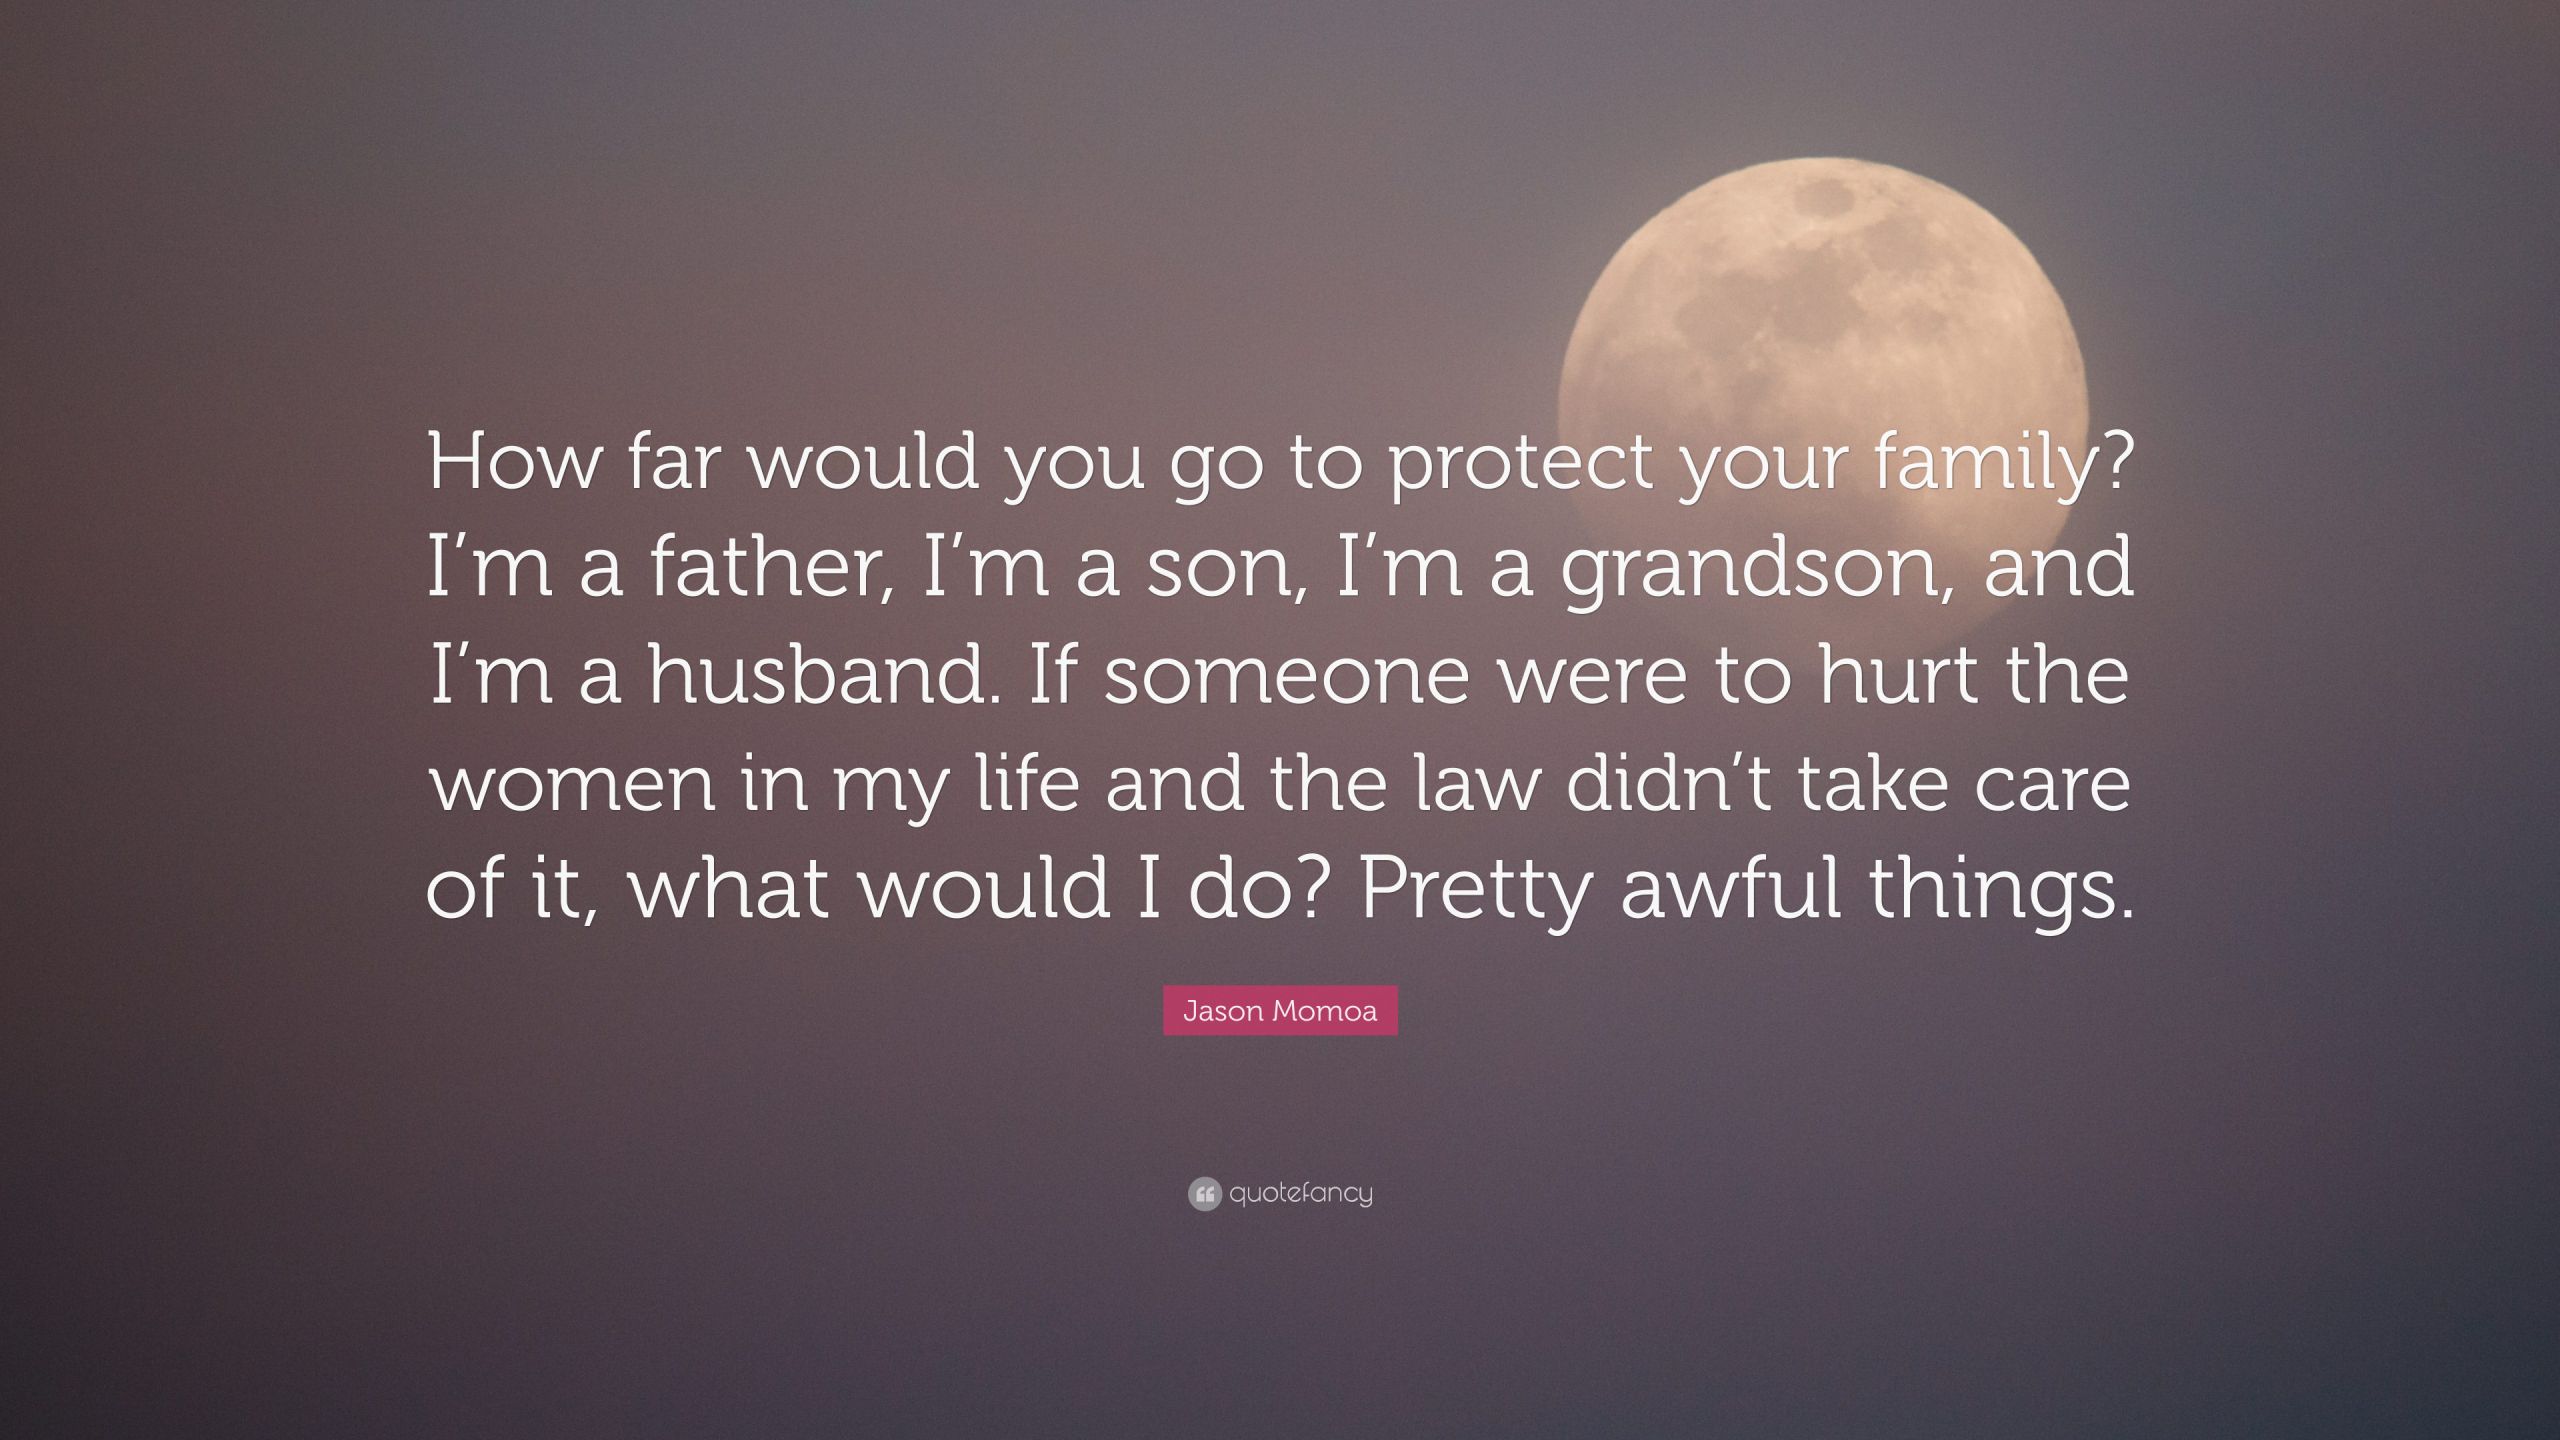 Quotes About Protecting Your Family
 Jason Momoa Quote “How far would you go to protect your